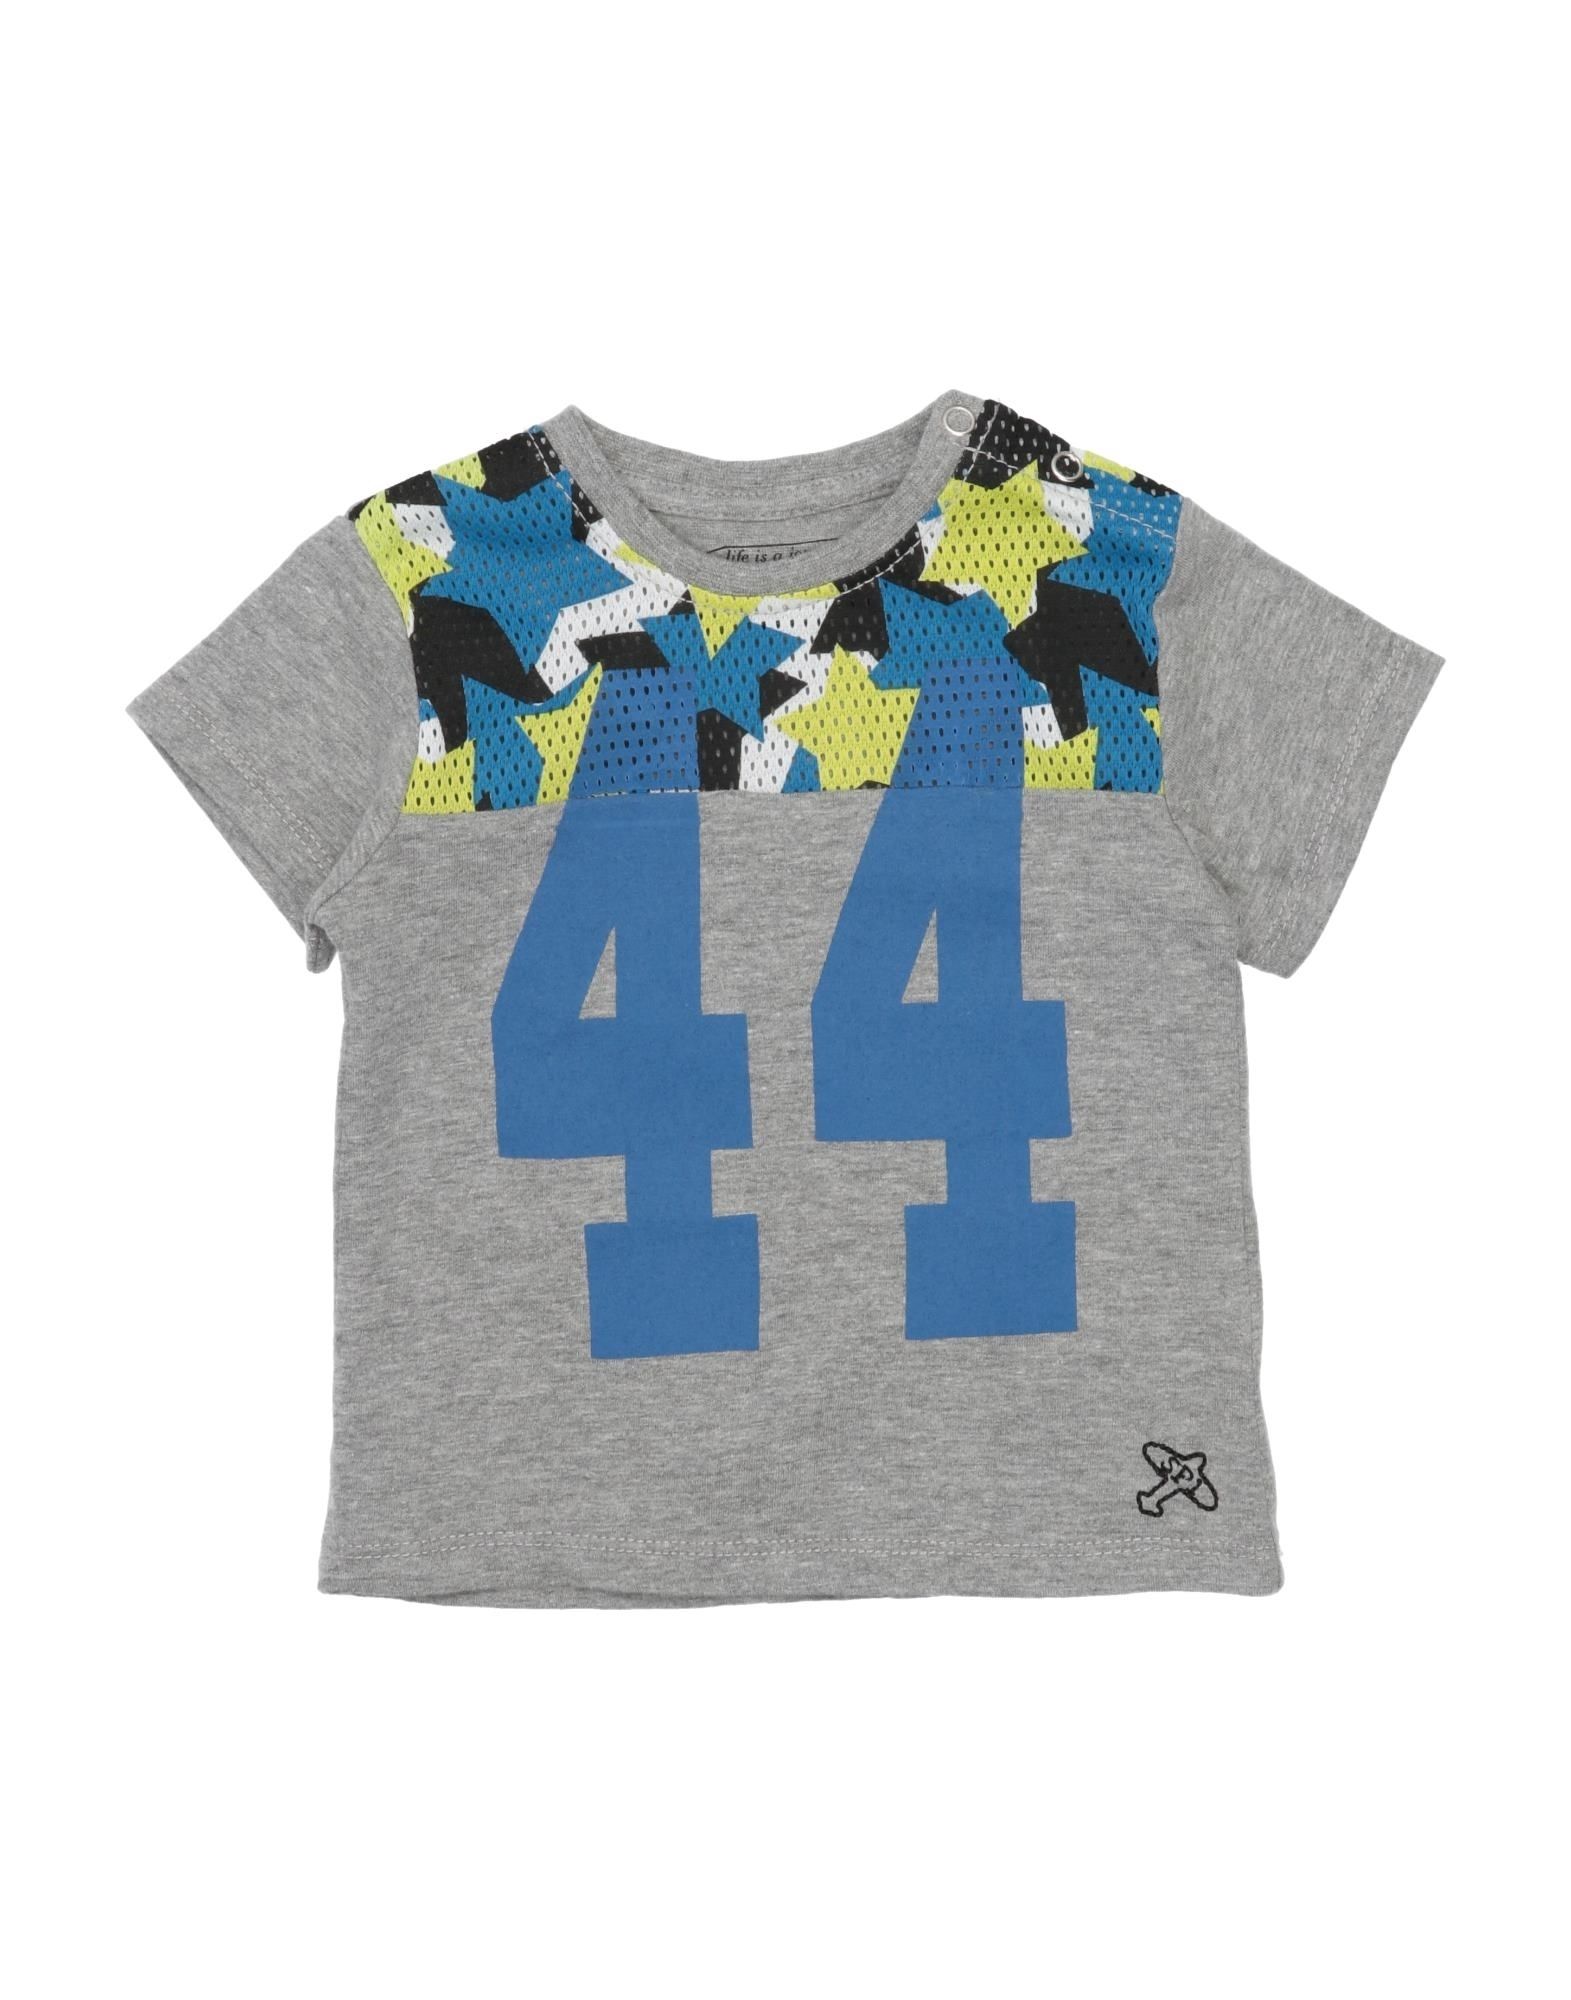 Sp1 Kids' T-shirts In Grey